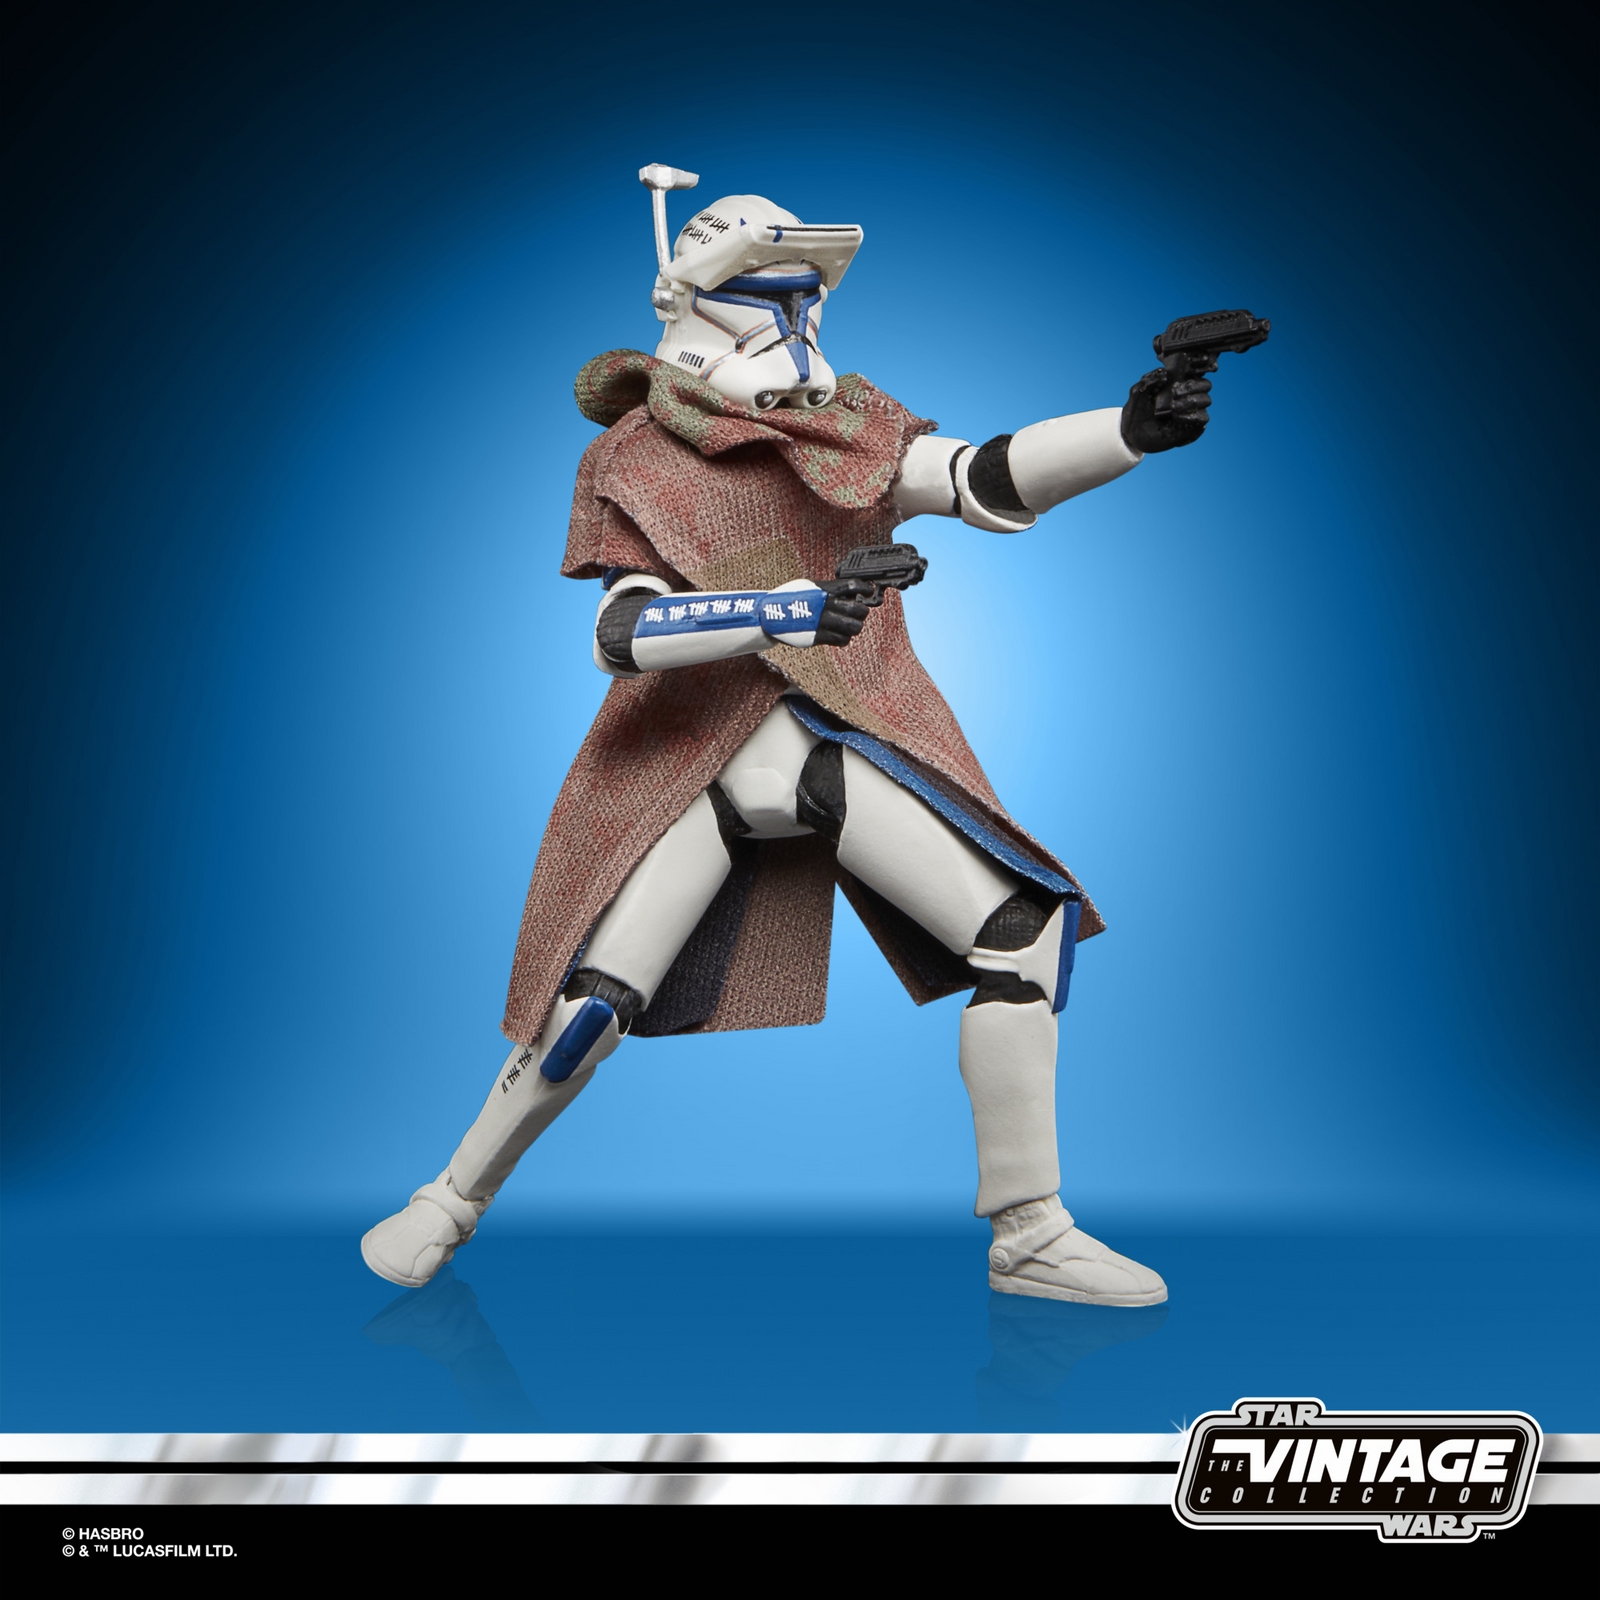 STAR WARS THE VINTAGE COLLECTION STAR WARS THE BAD BATCH Figure 4-Pack - CLONE CAPTAIN REX (5).jpg